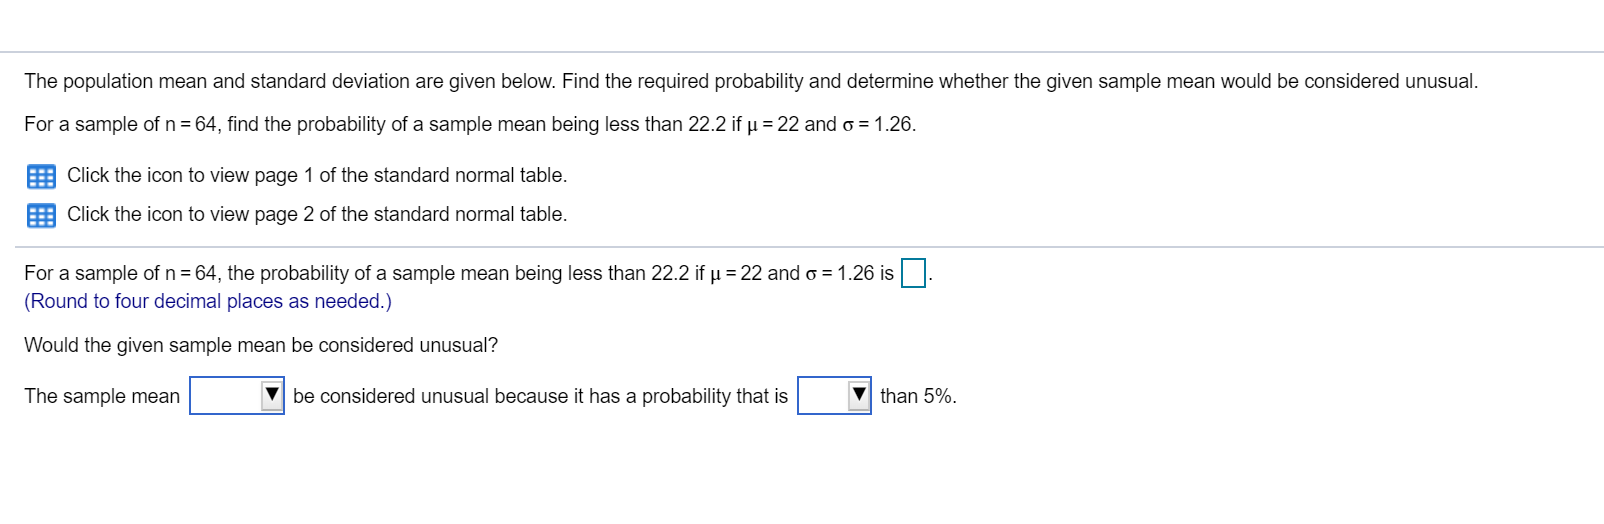 The population mean and standard deviation are given below. Find the required probability and determine whether the given sample mean would be considered unusual.
For a sample of n = 64, find the probability of a sample mean being less than 22.2 if µ = 22 and o = 1.26.
Click the icon to view page 1 of the standard normal table.
Click the icon to view page 2 of the standard normal table.
For a sample of n = 64, the probability of a sample mean being less than 22.2 if u = 22 and o = 1.26 is.
(Round to four decimal places as needed.)
Would the given sample mean be considered unusual?
The sample mean
be considered unusual because it has a probability that is
than 5%.
